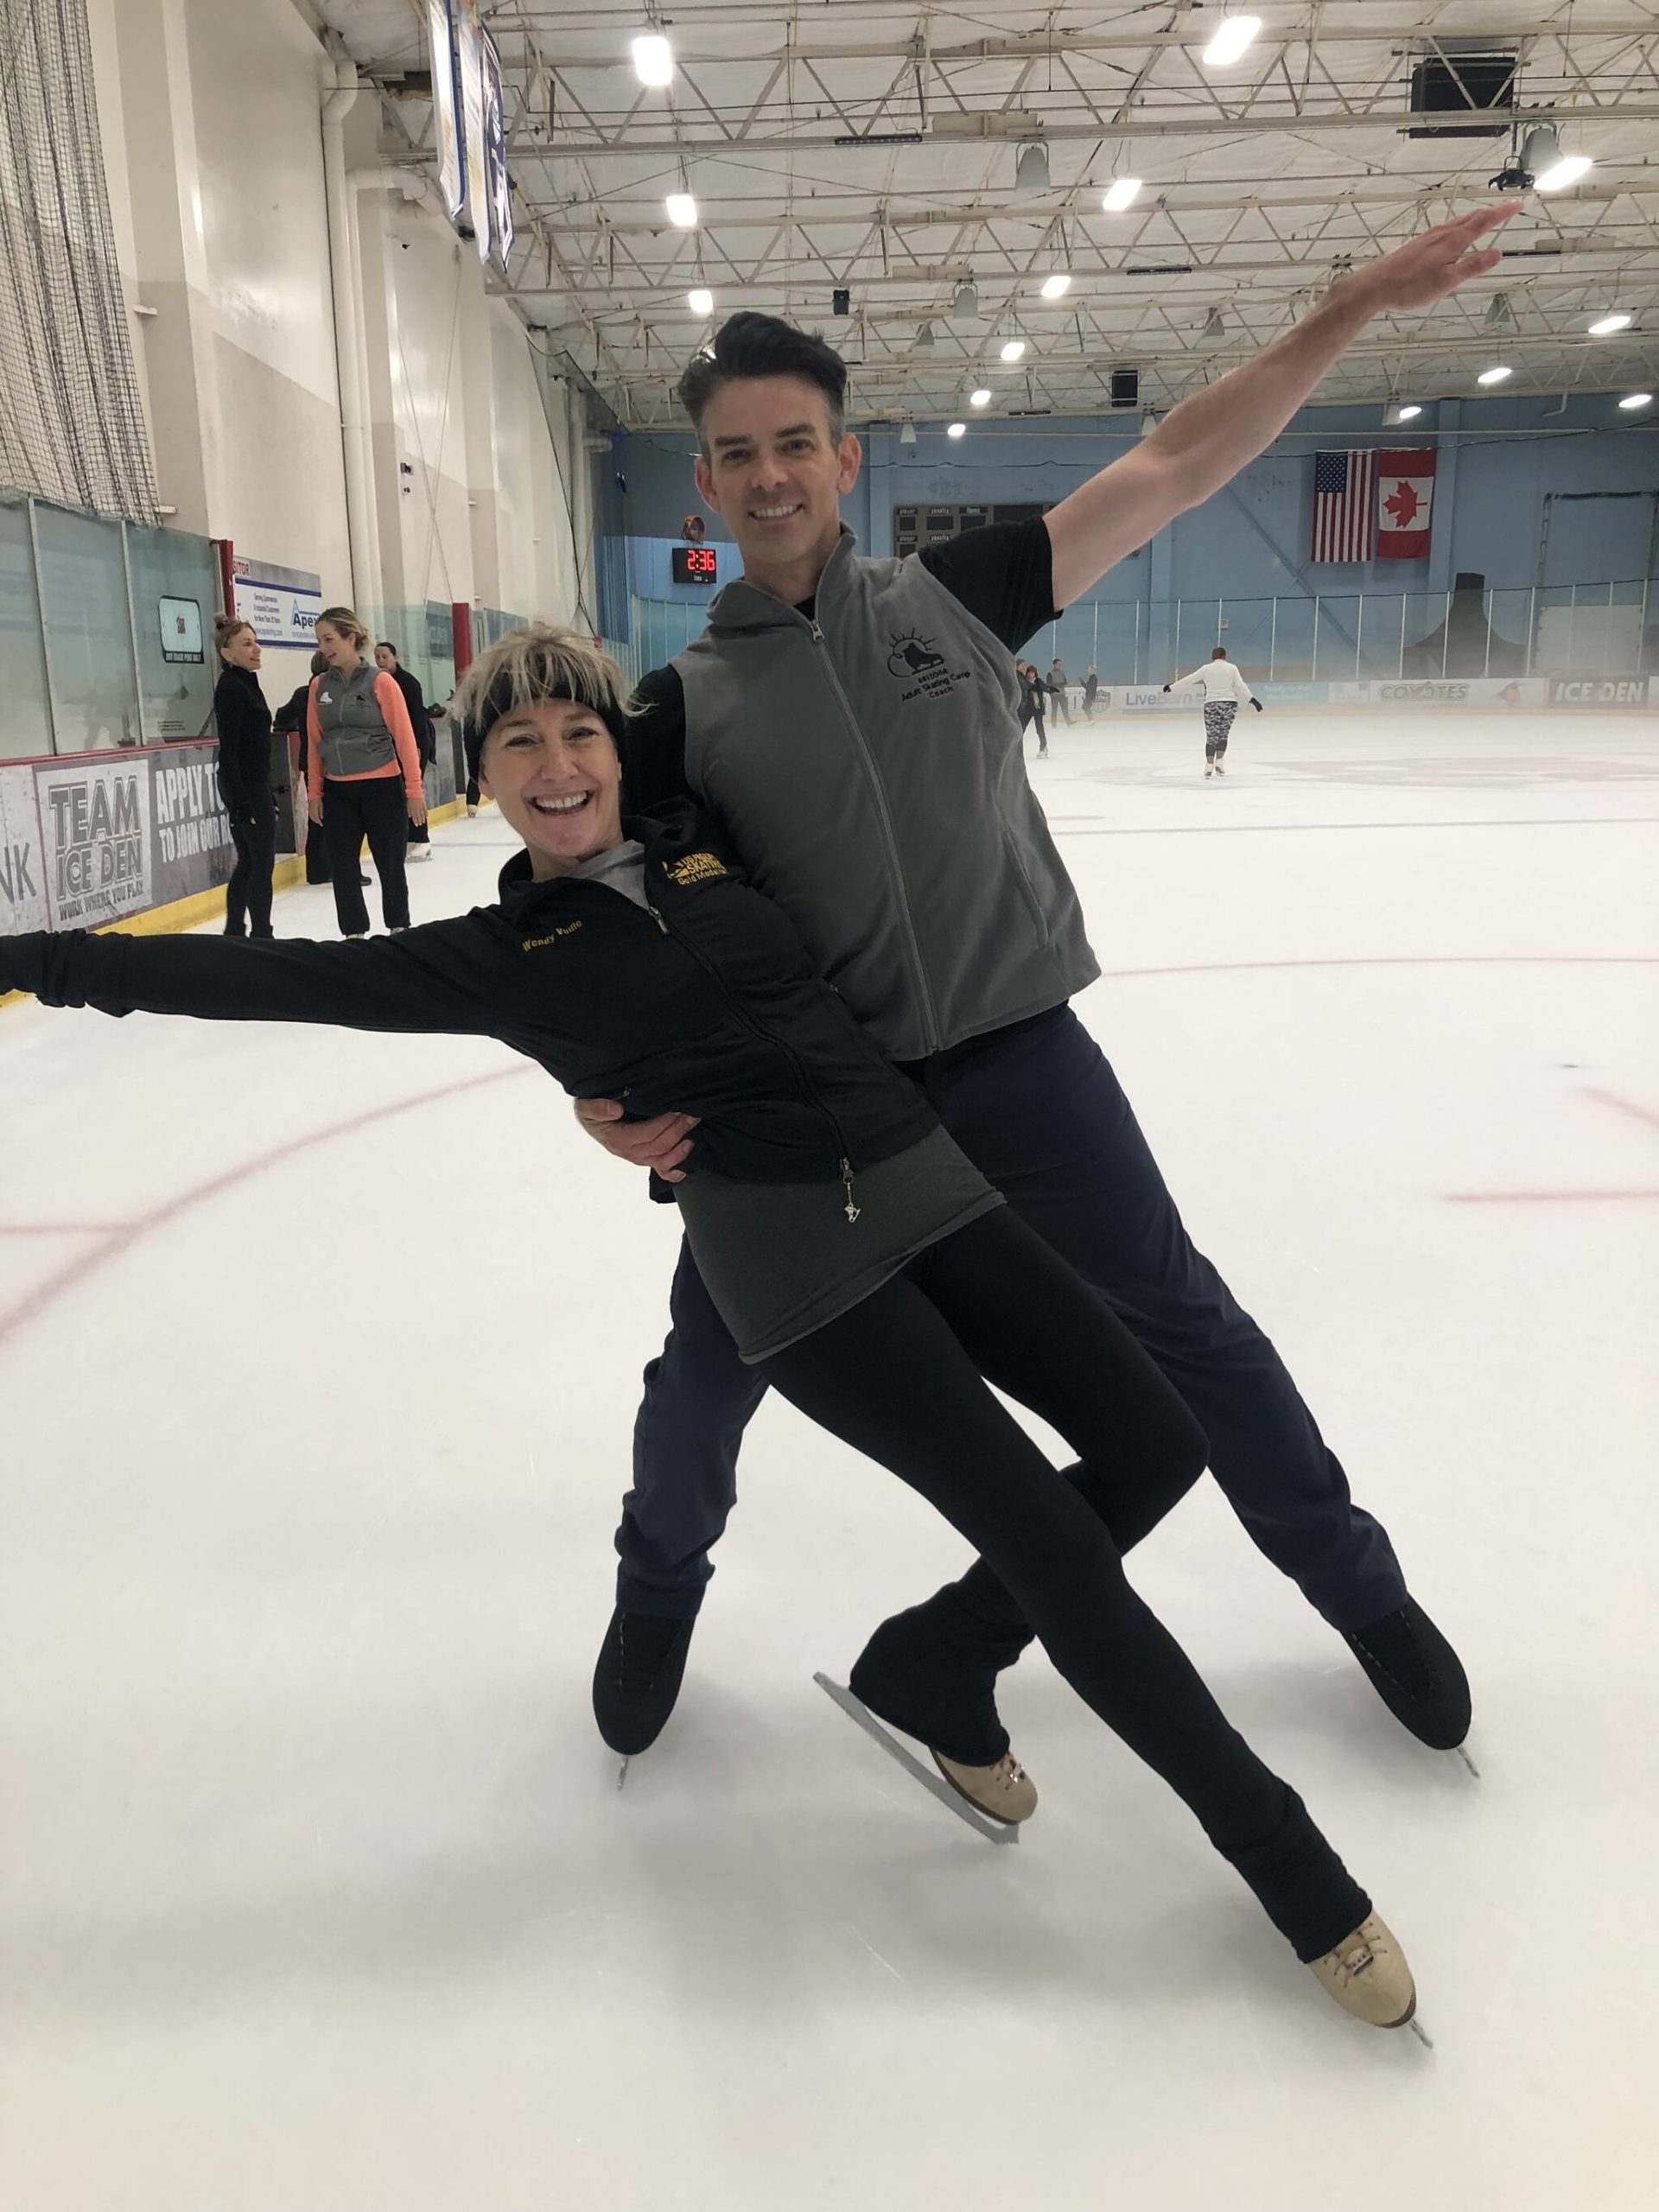 Wendy Vuille poses with skater Brendyn Hatfield at the Arizona Adult Skating Camp. (Courtesy Photo / Wendy Vuille)